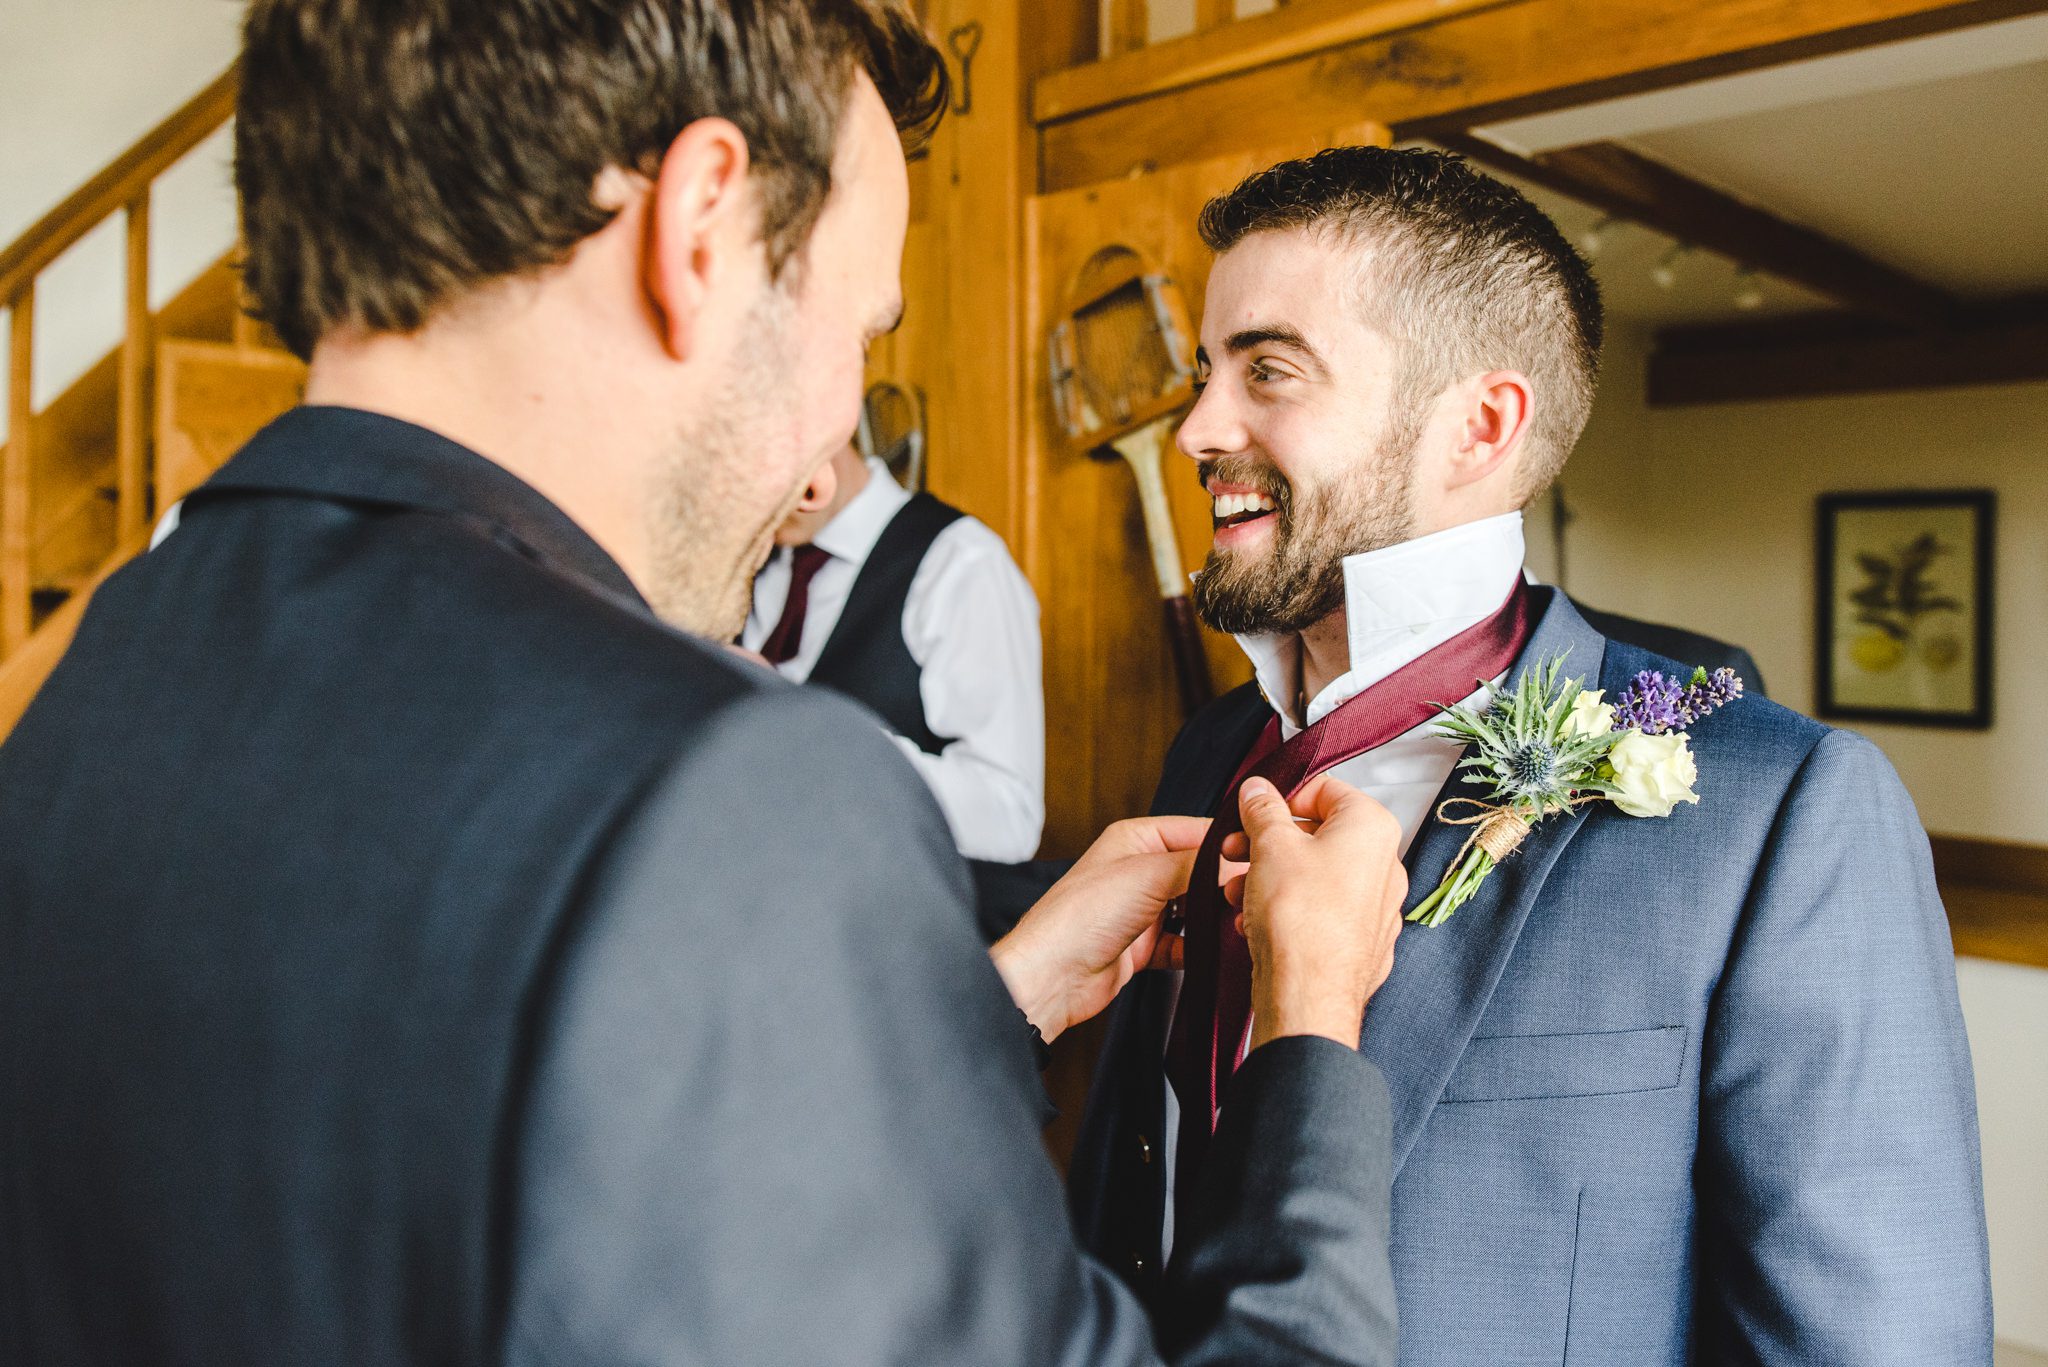 Agroomsman attaching the groom's buttonhole at a Merriscourt wedding